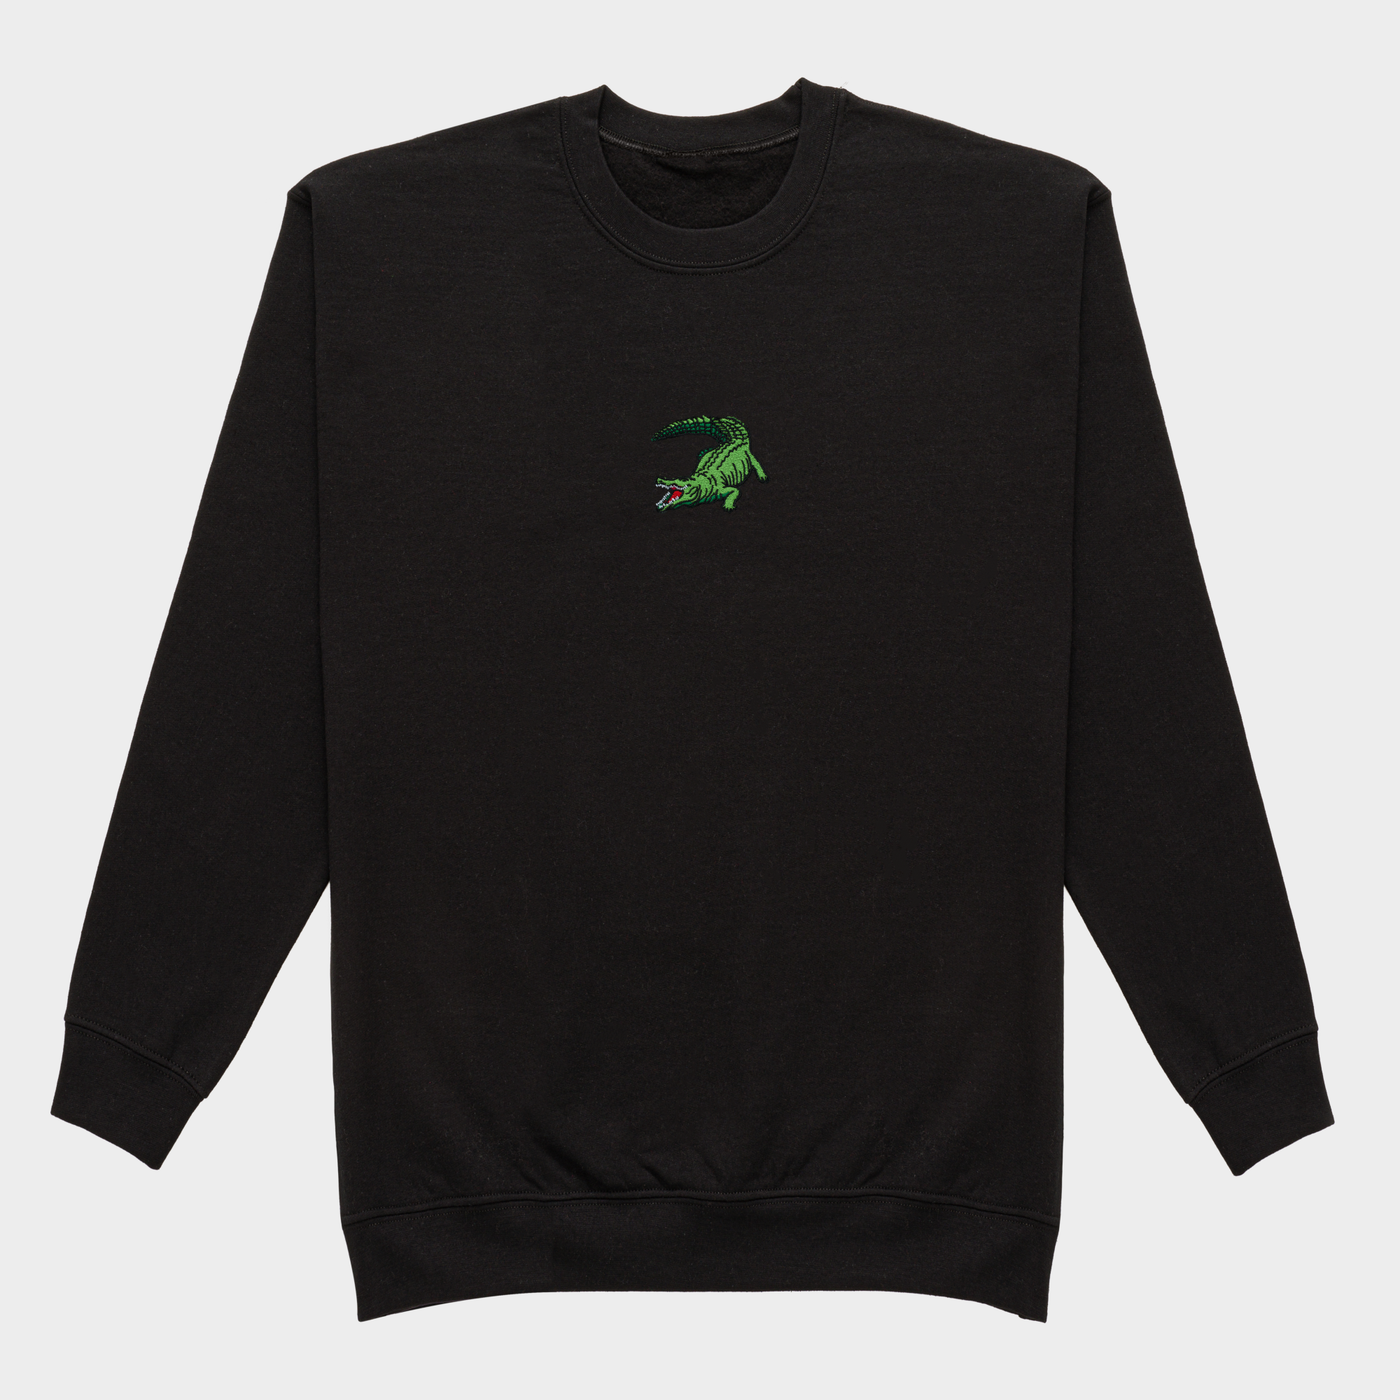 Bobby's Planet Men's Embroidered Saltwater Crocodile Sweatshirt from Australia Down Under Animals Collection in Black Color#color_black